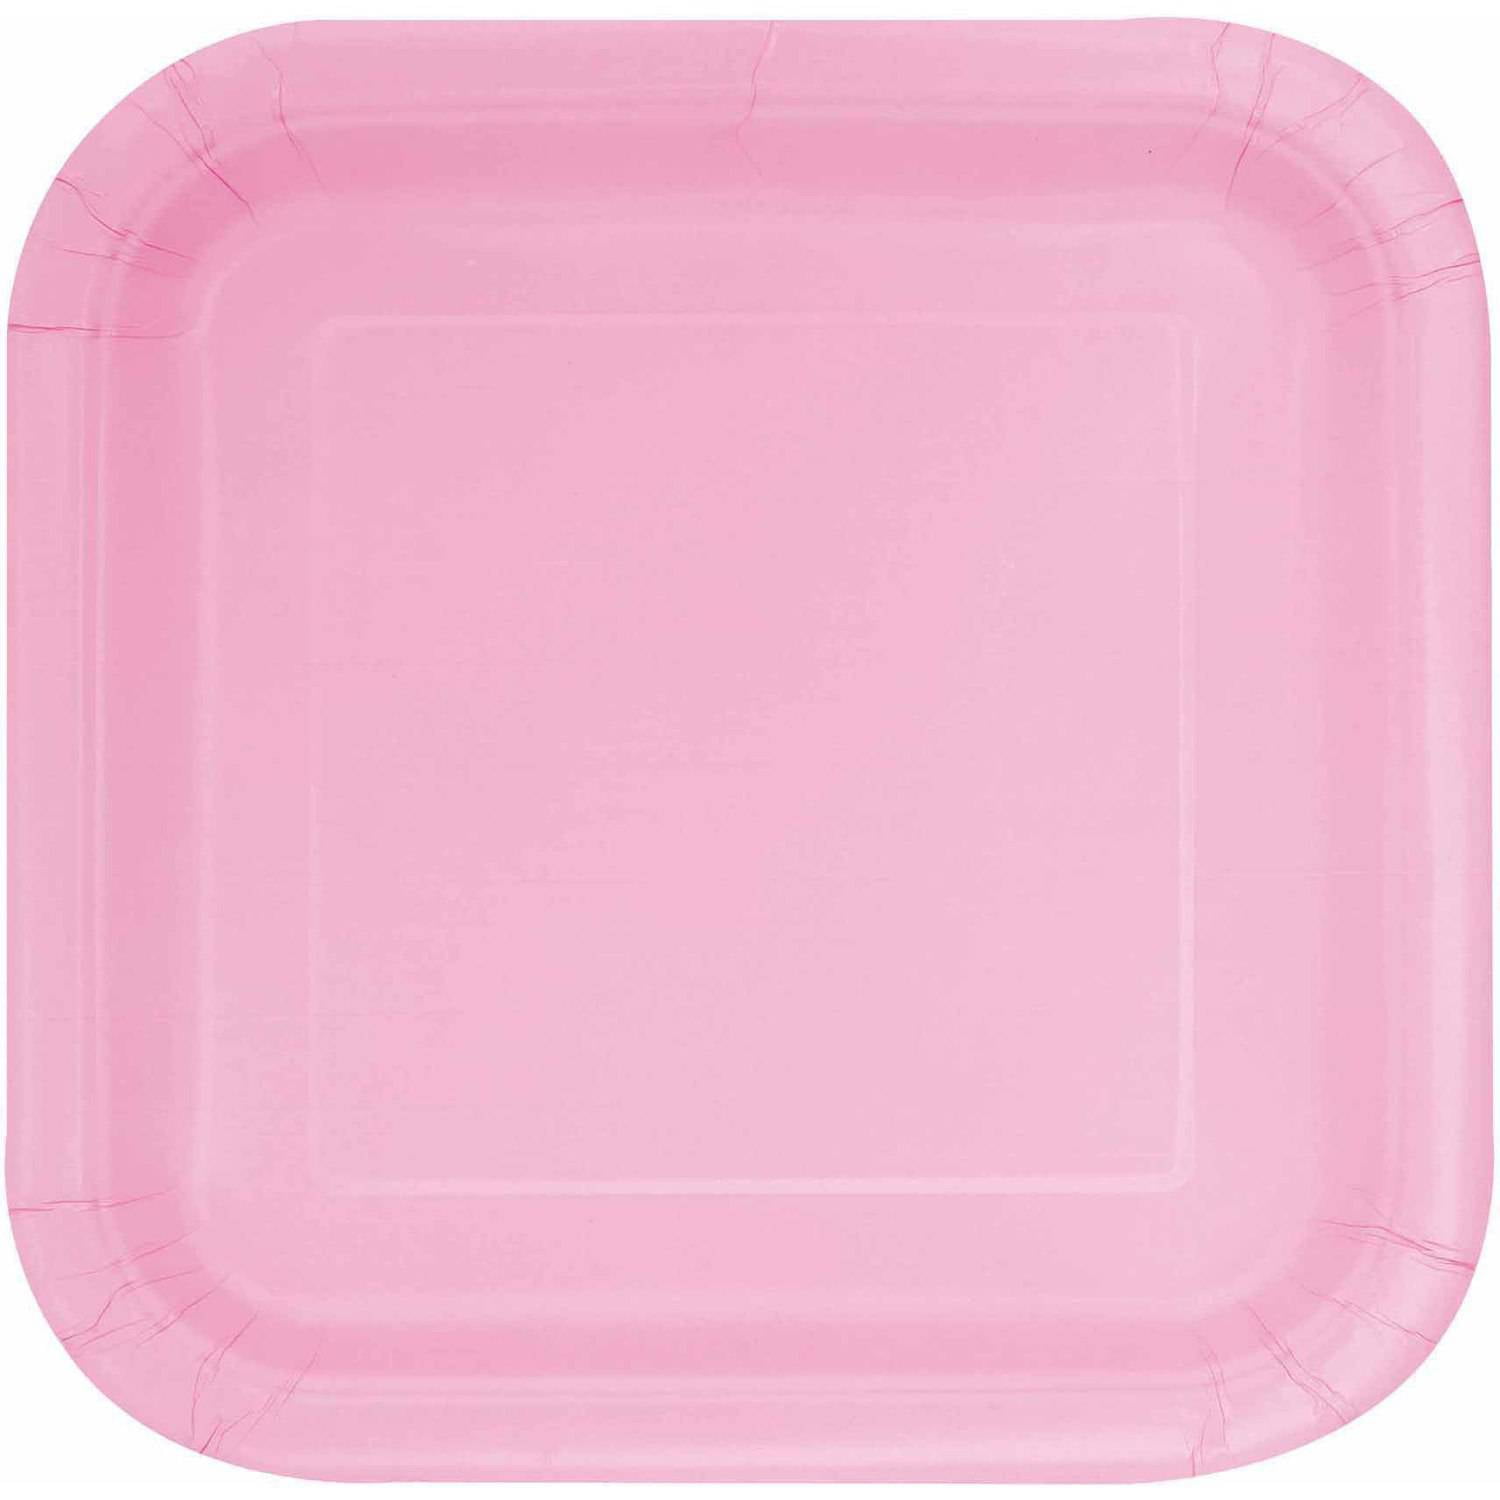 20pk Bright Pink Square Paper Plates 18cm  Birthday Wedding Party Tableware 